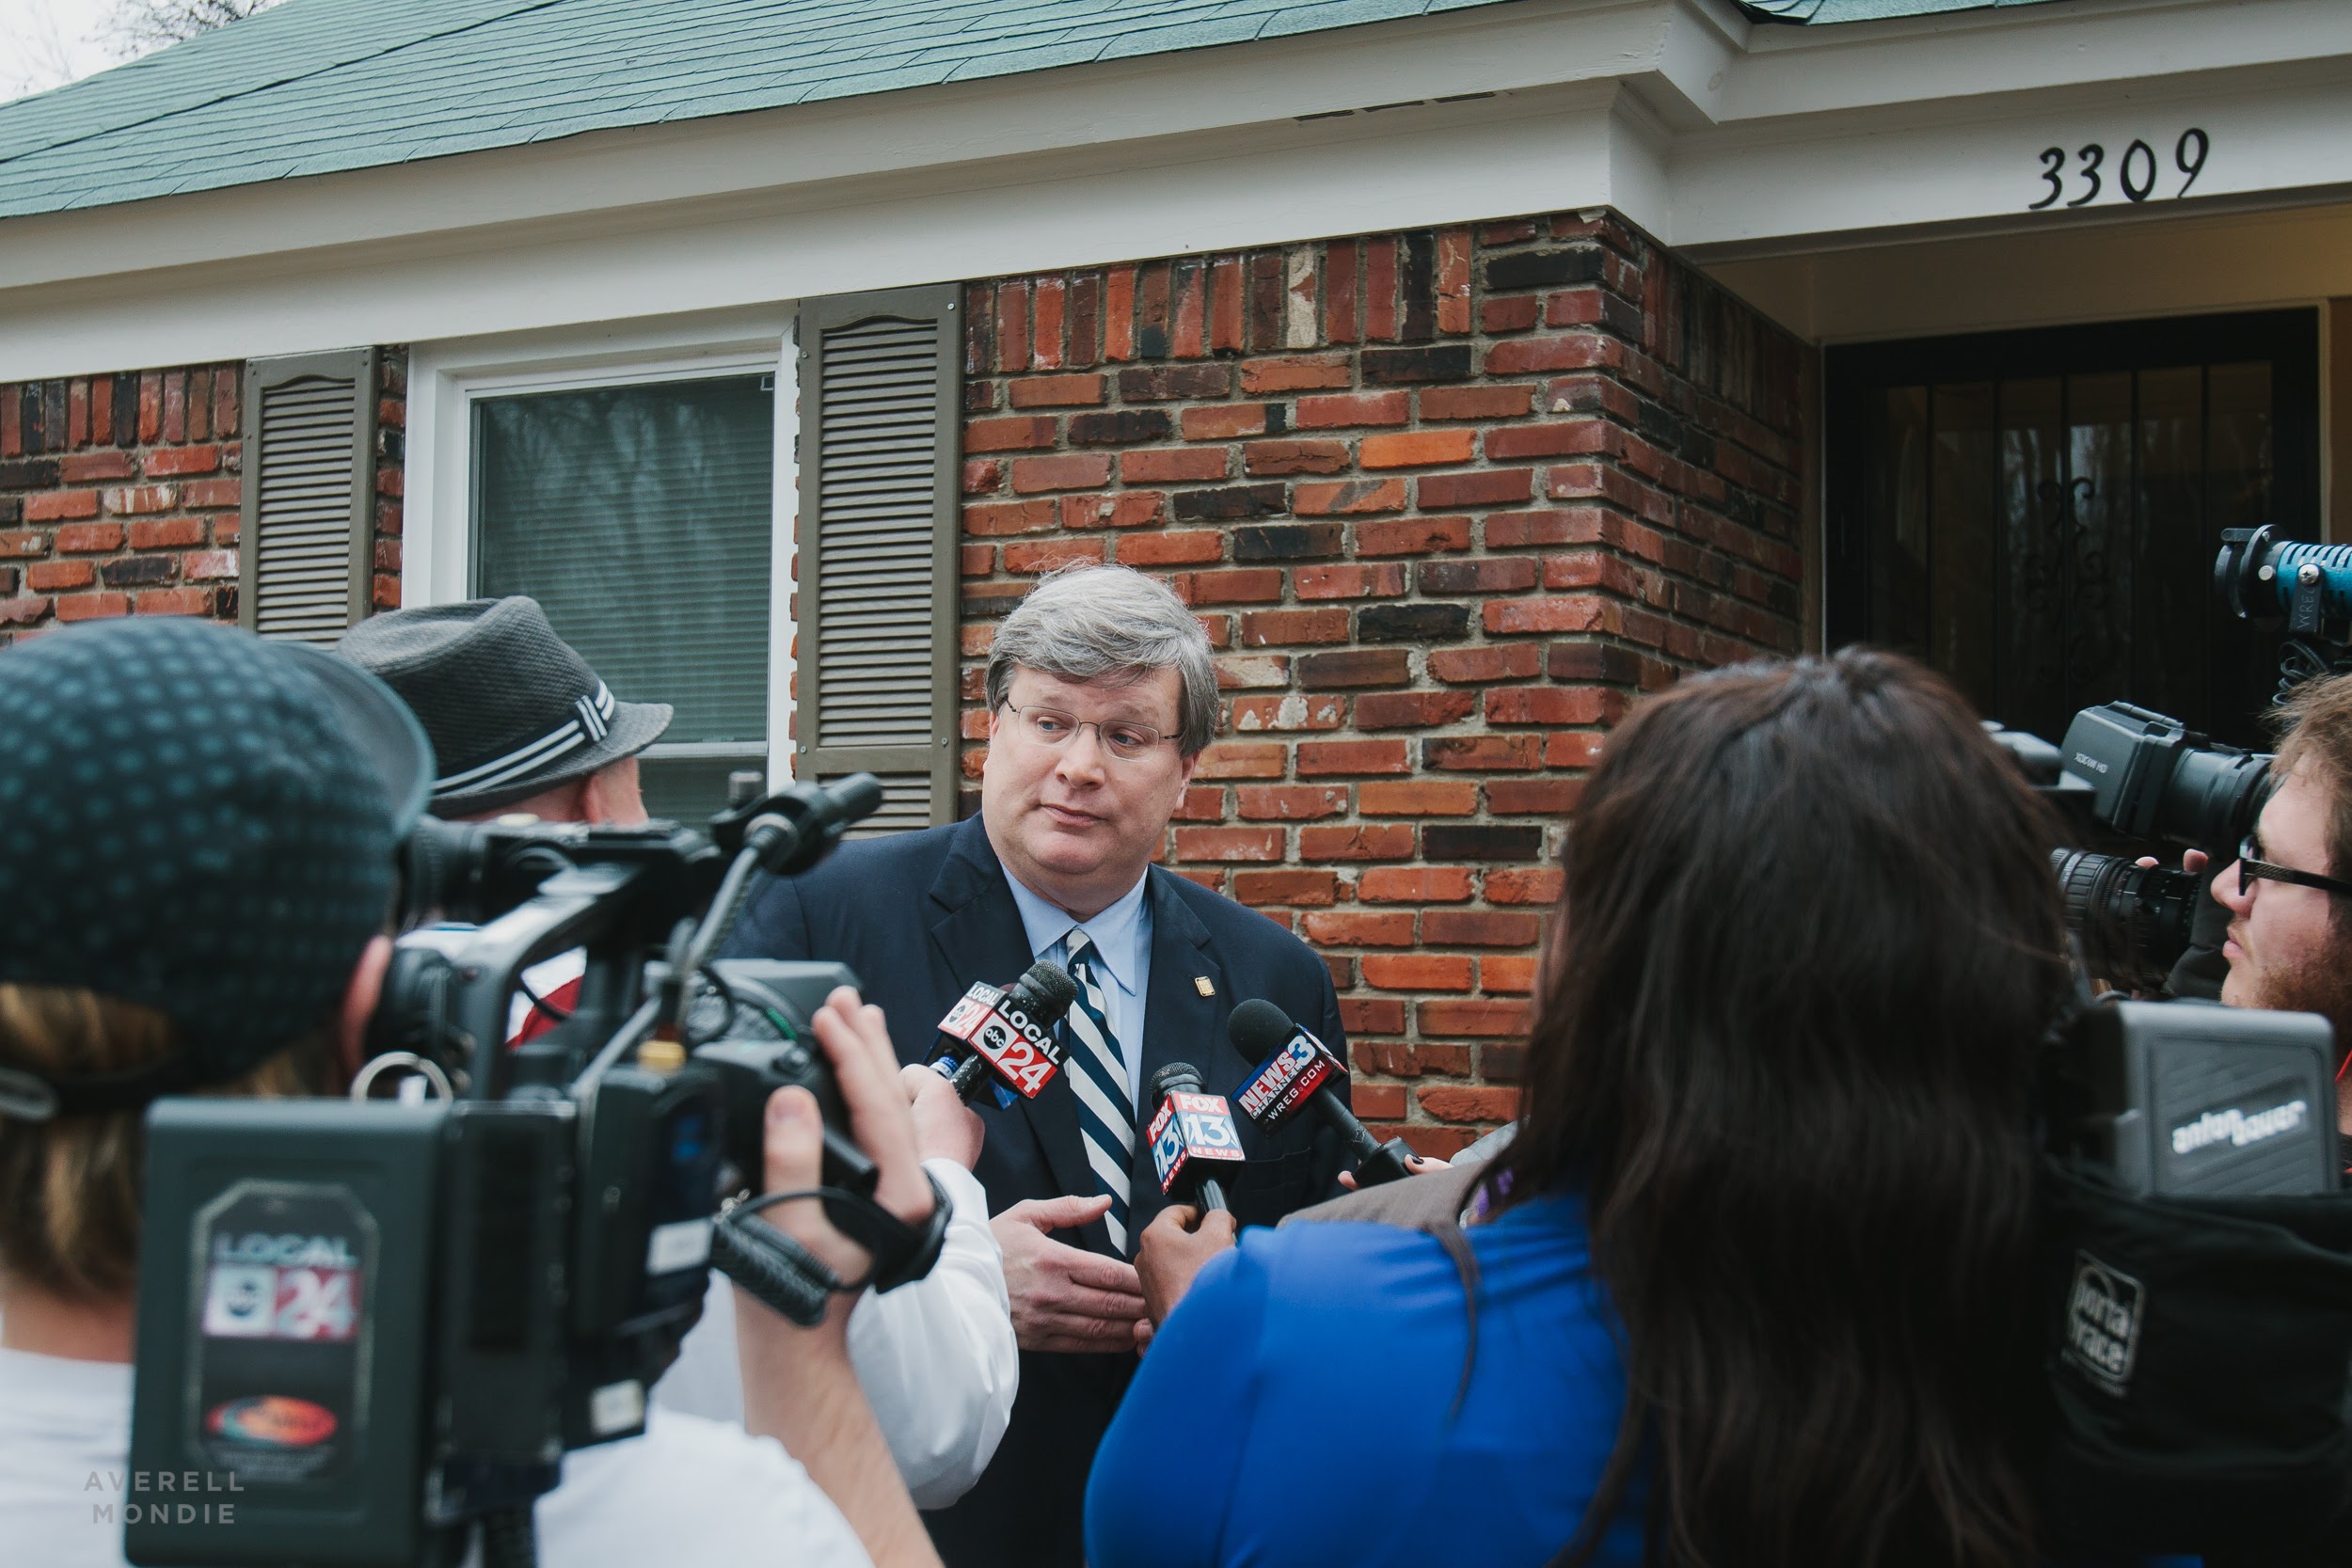 Memphis Mayor Jim Strickland was interviewed by local news outlets outside of one of the homes renovated by Frayser CDC. (Averell Mondie)